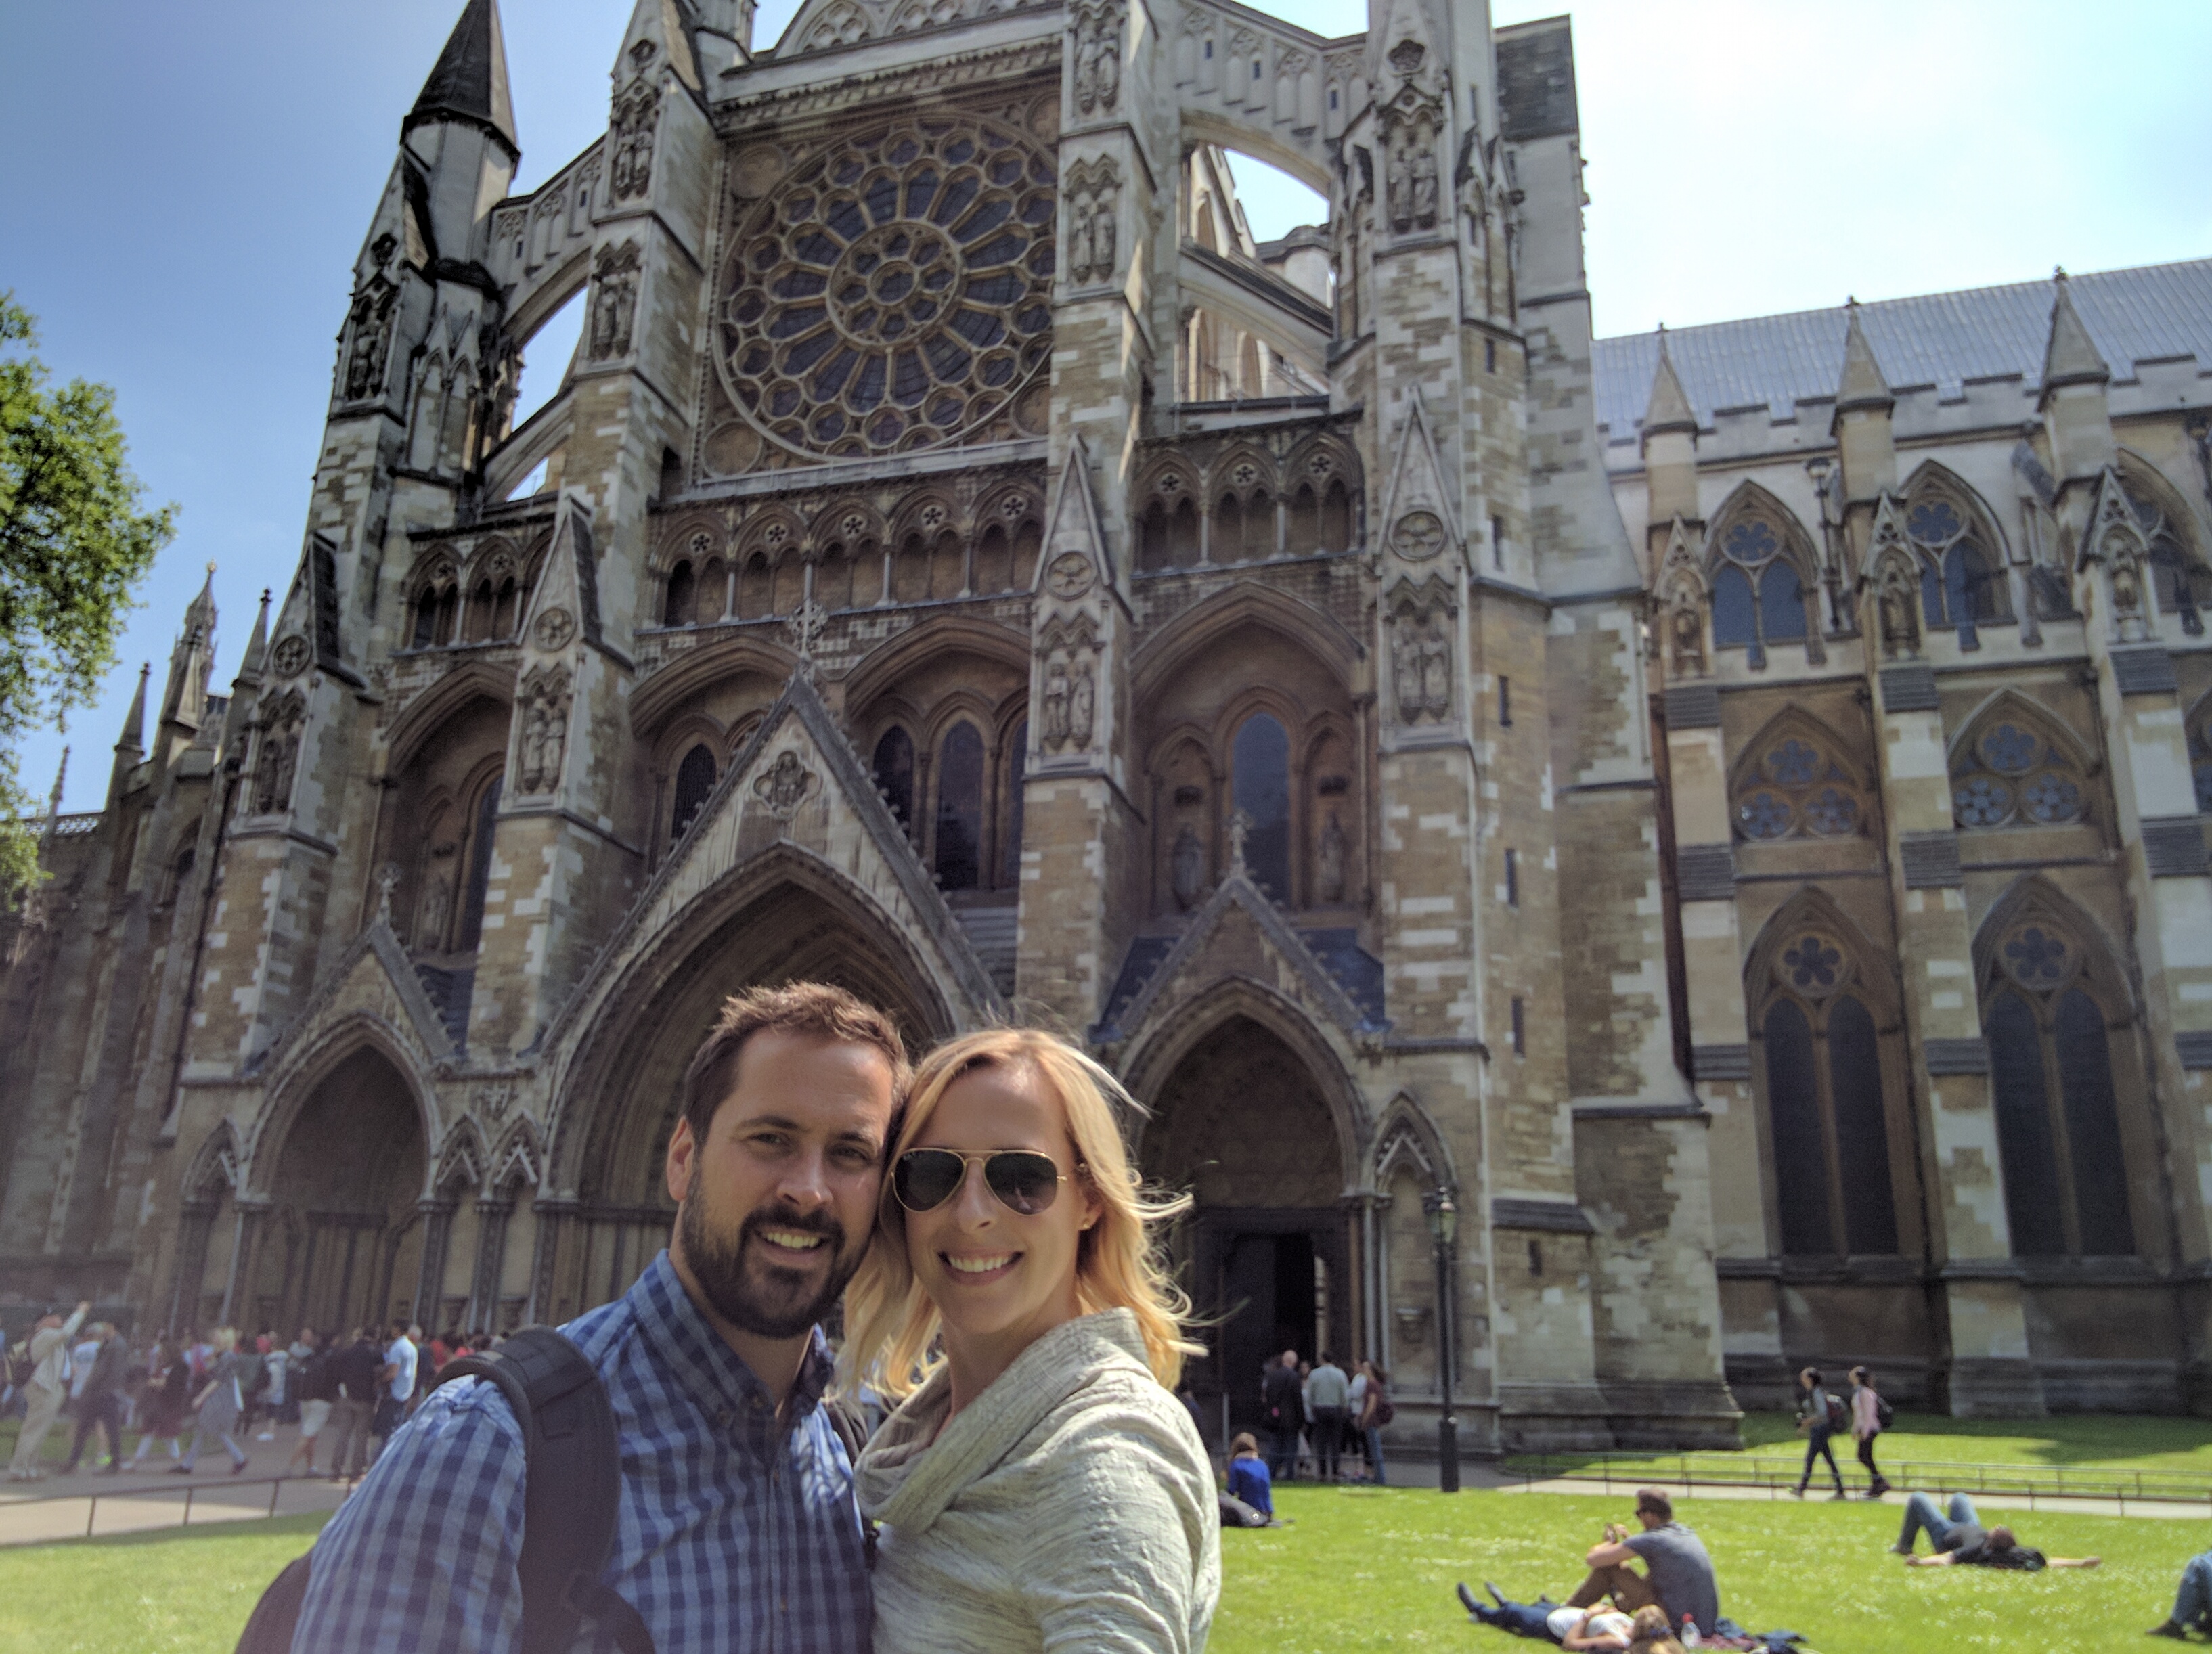 Us in front of Westminster Abbey. No photography allowed inside.